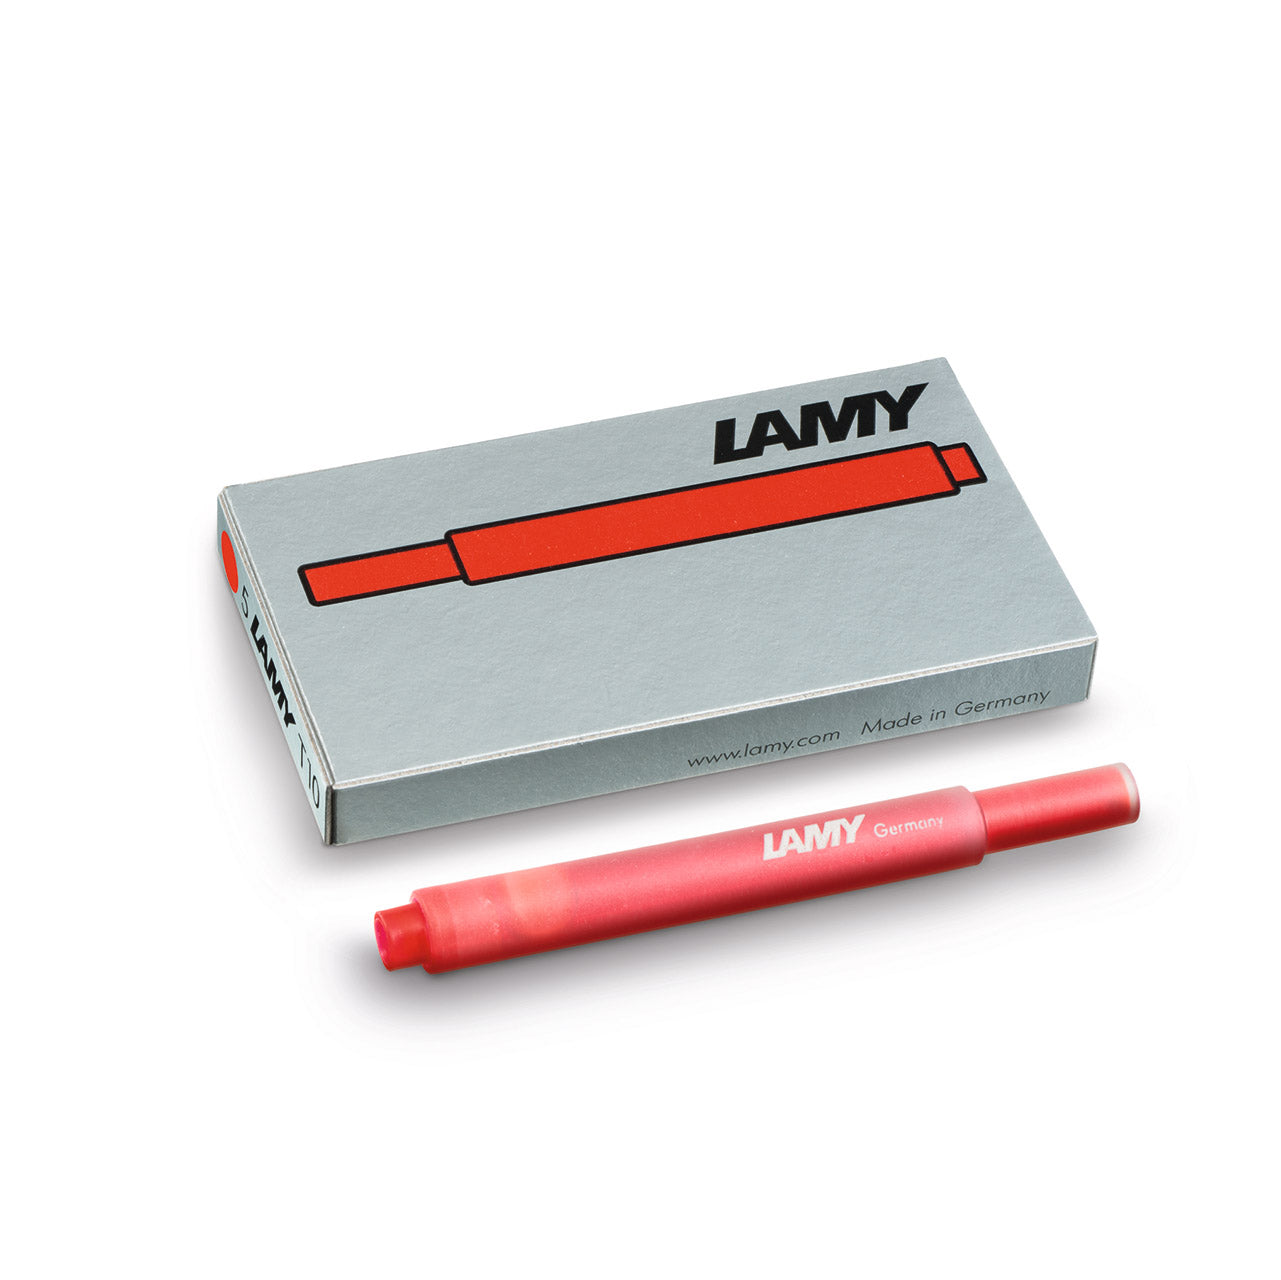 LAMY T10 Ink Cartridge Pack of 5 - Pencraft the boutique